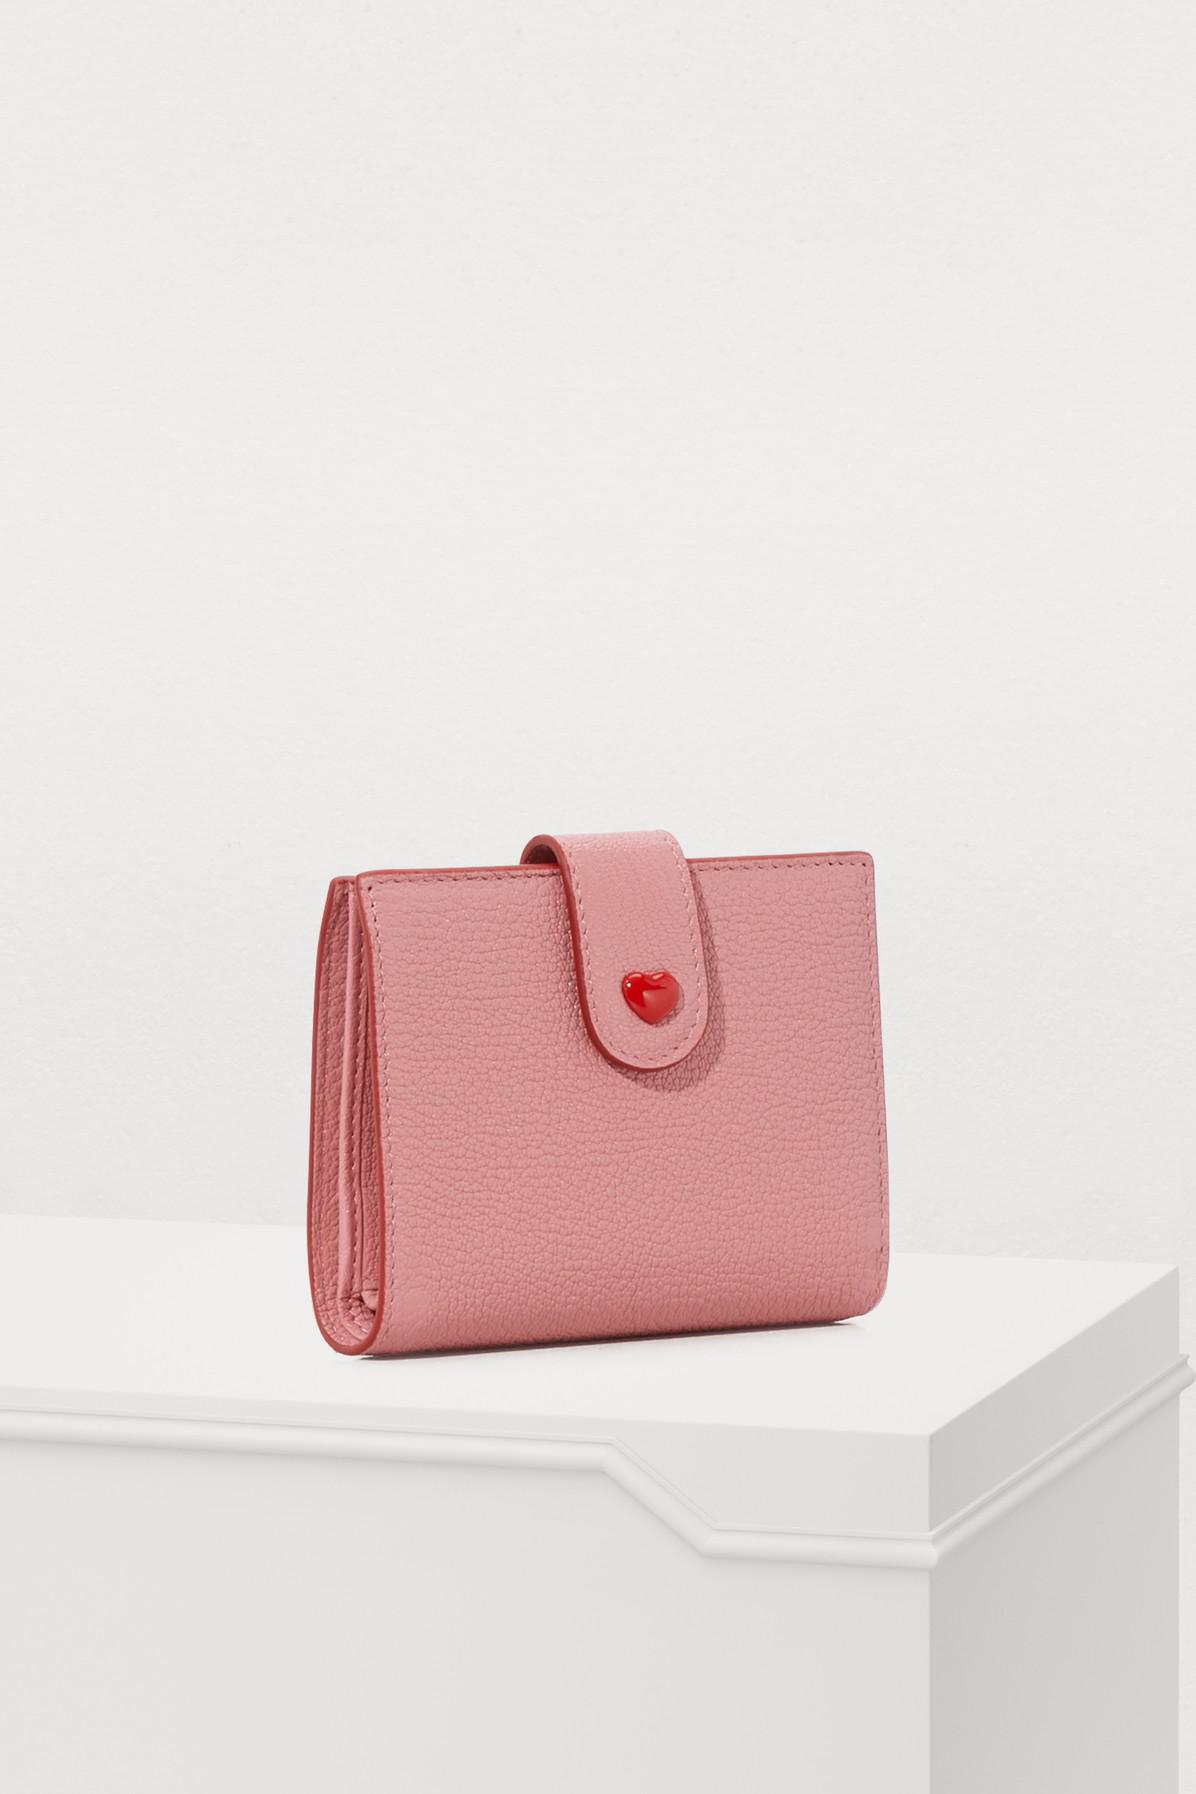 Miu Miu Forever Small Wallet in Pink Lyst